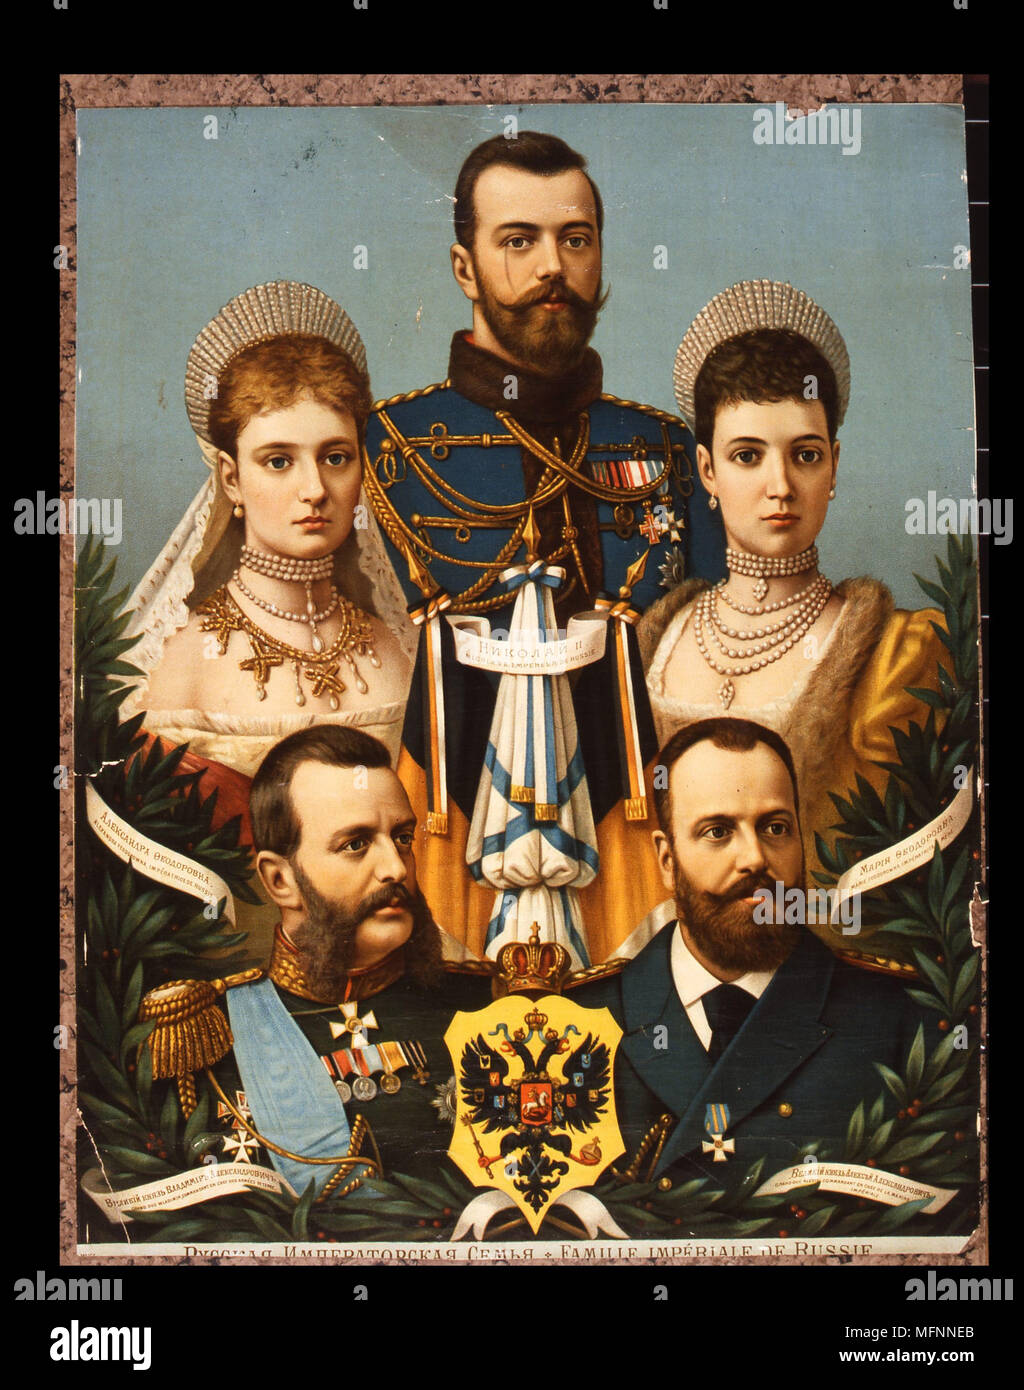 The Russian Imperial family. Bottom right: Alexander II. Bottom left: Alexander III. Middle left: Alexandra Feodorovna (Alix of Hesse) wife of Nicholas II. Middle right: Maria Feodorovna, wife of Alexander III. Top. Nicholas II, the last Tsar. Chromolithograph. Stock Photo